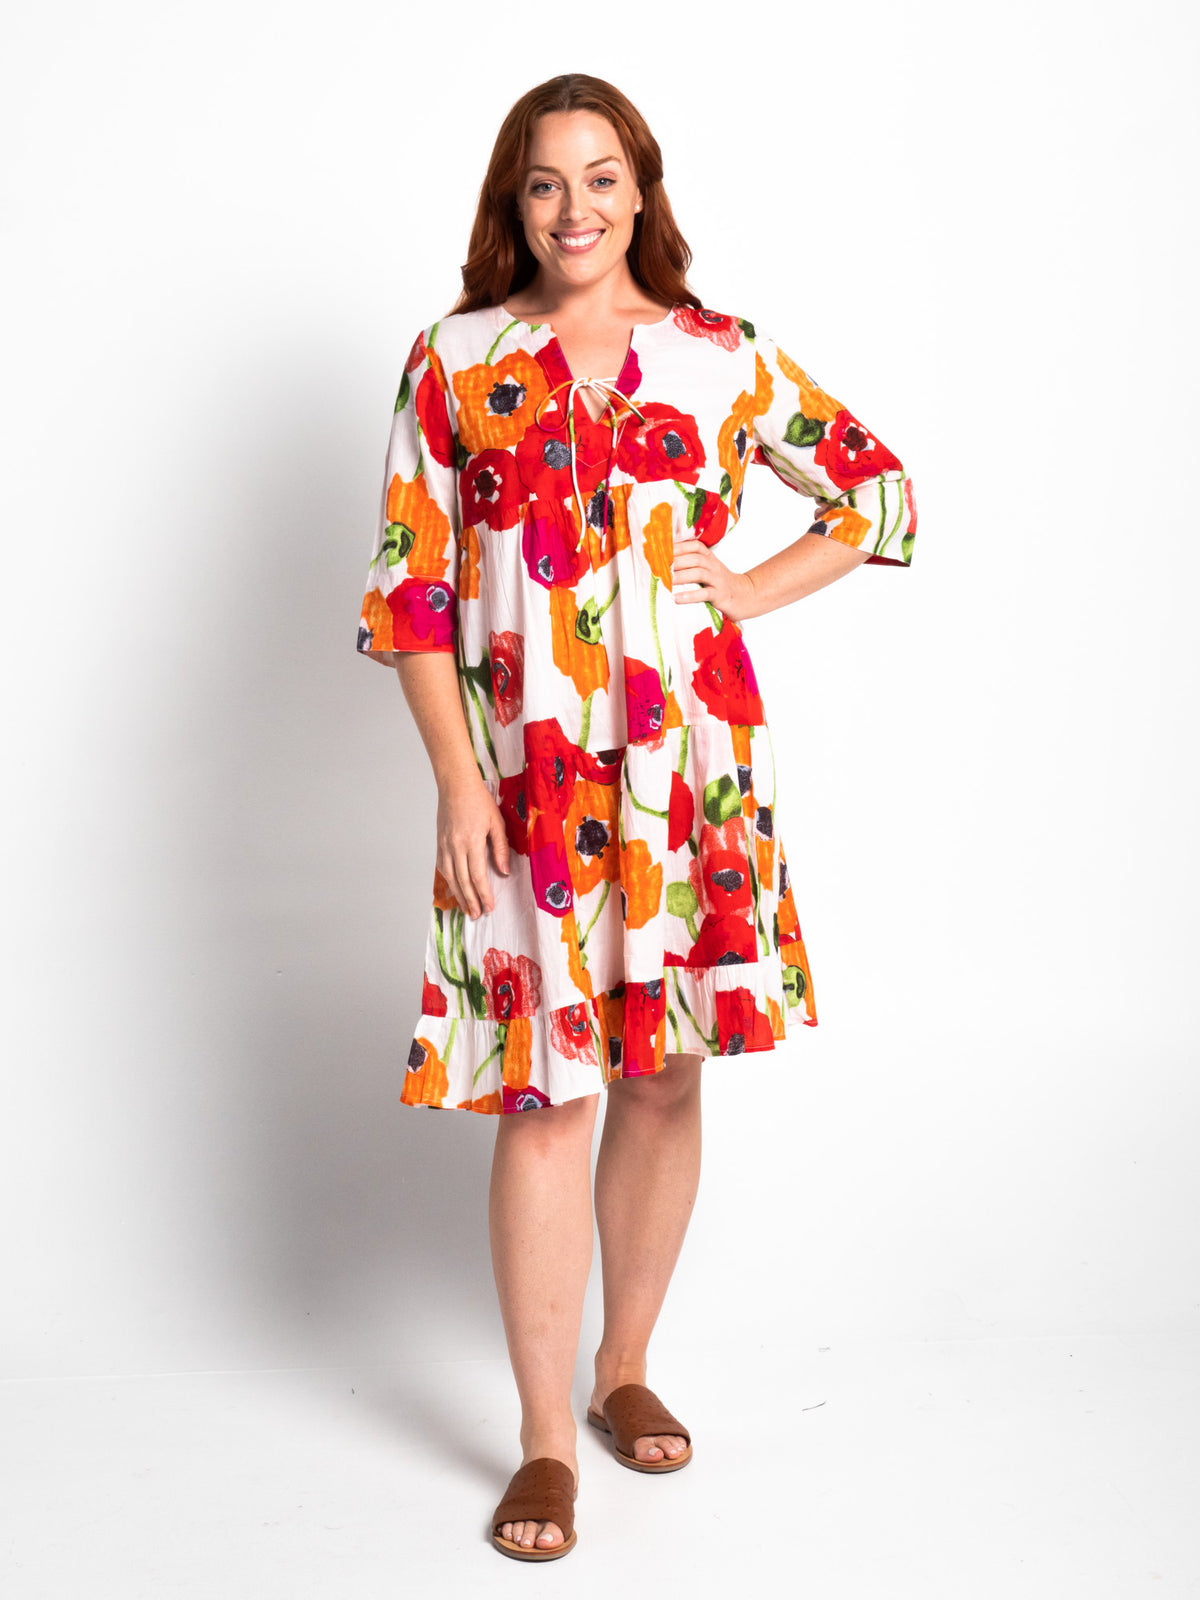 Keppel V-neck Gypsy Dress in Orange and Red Poppies